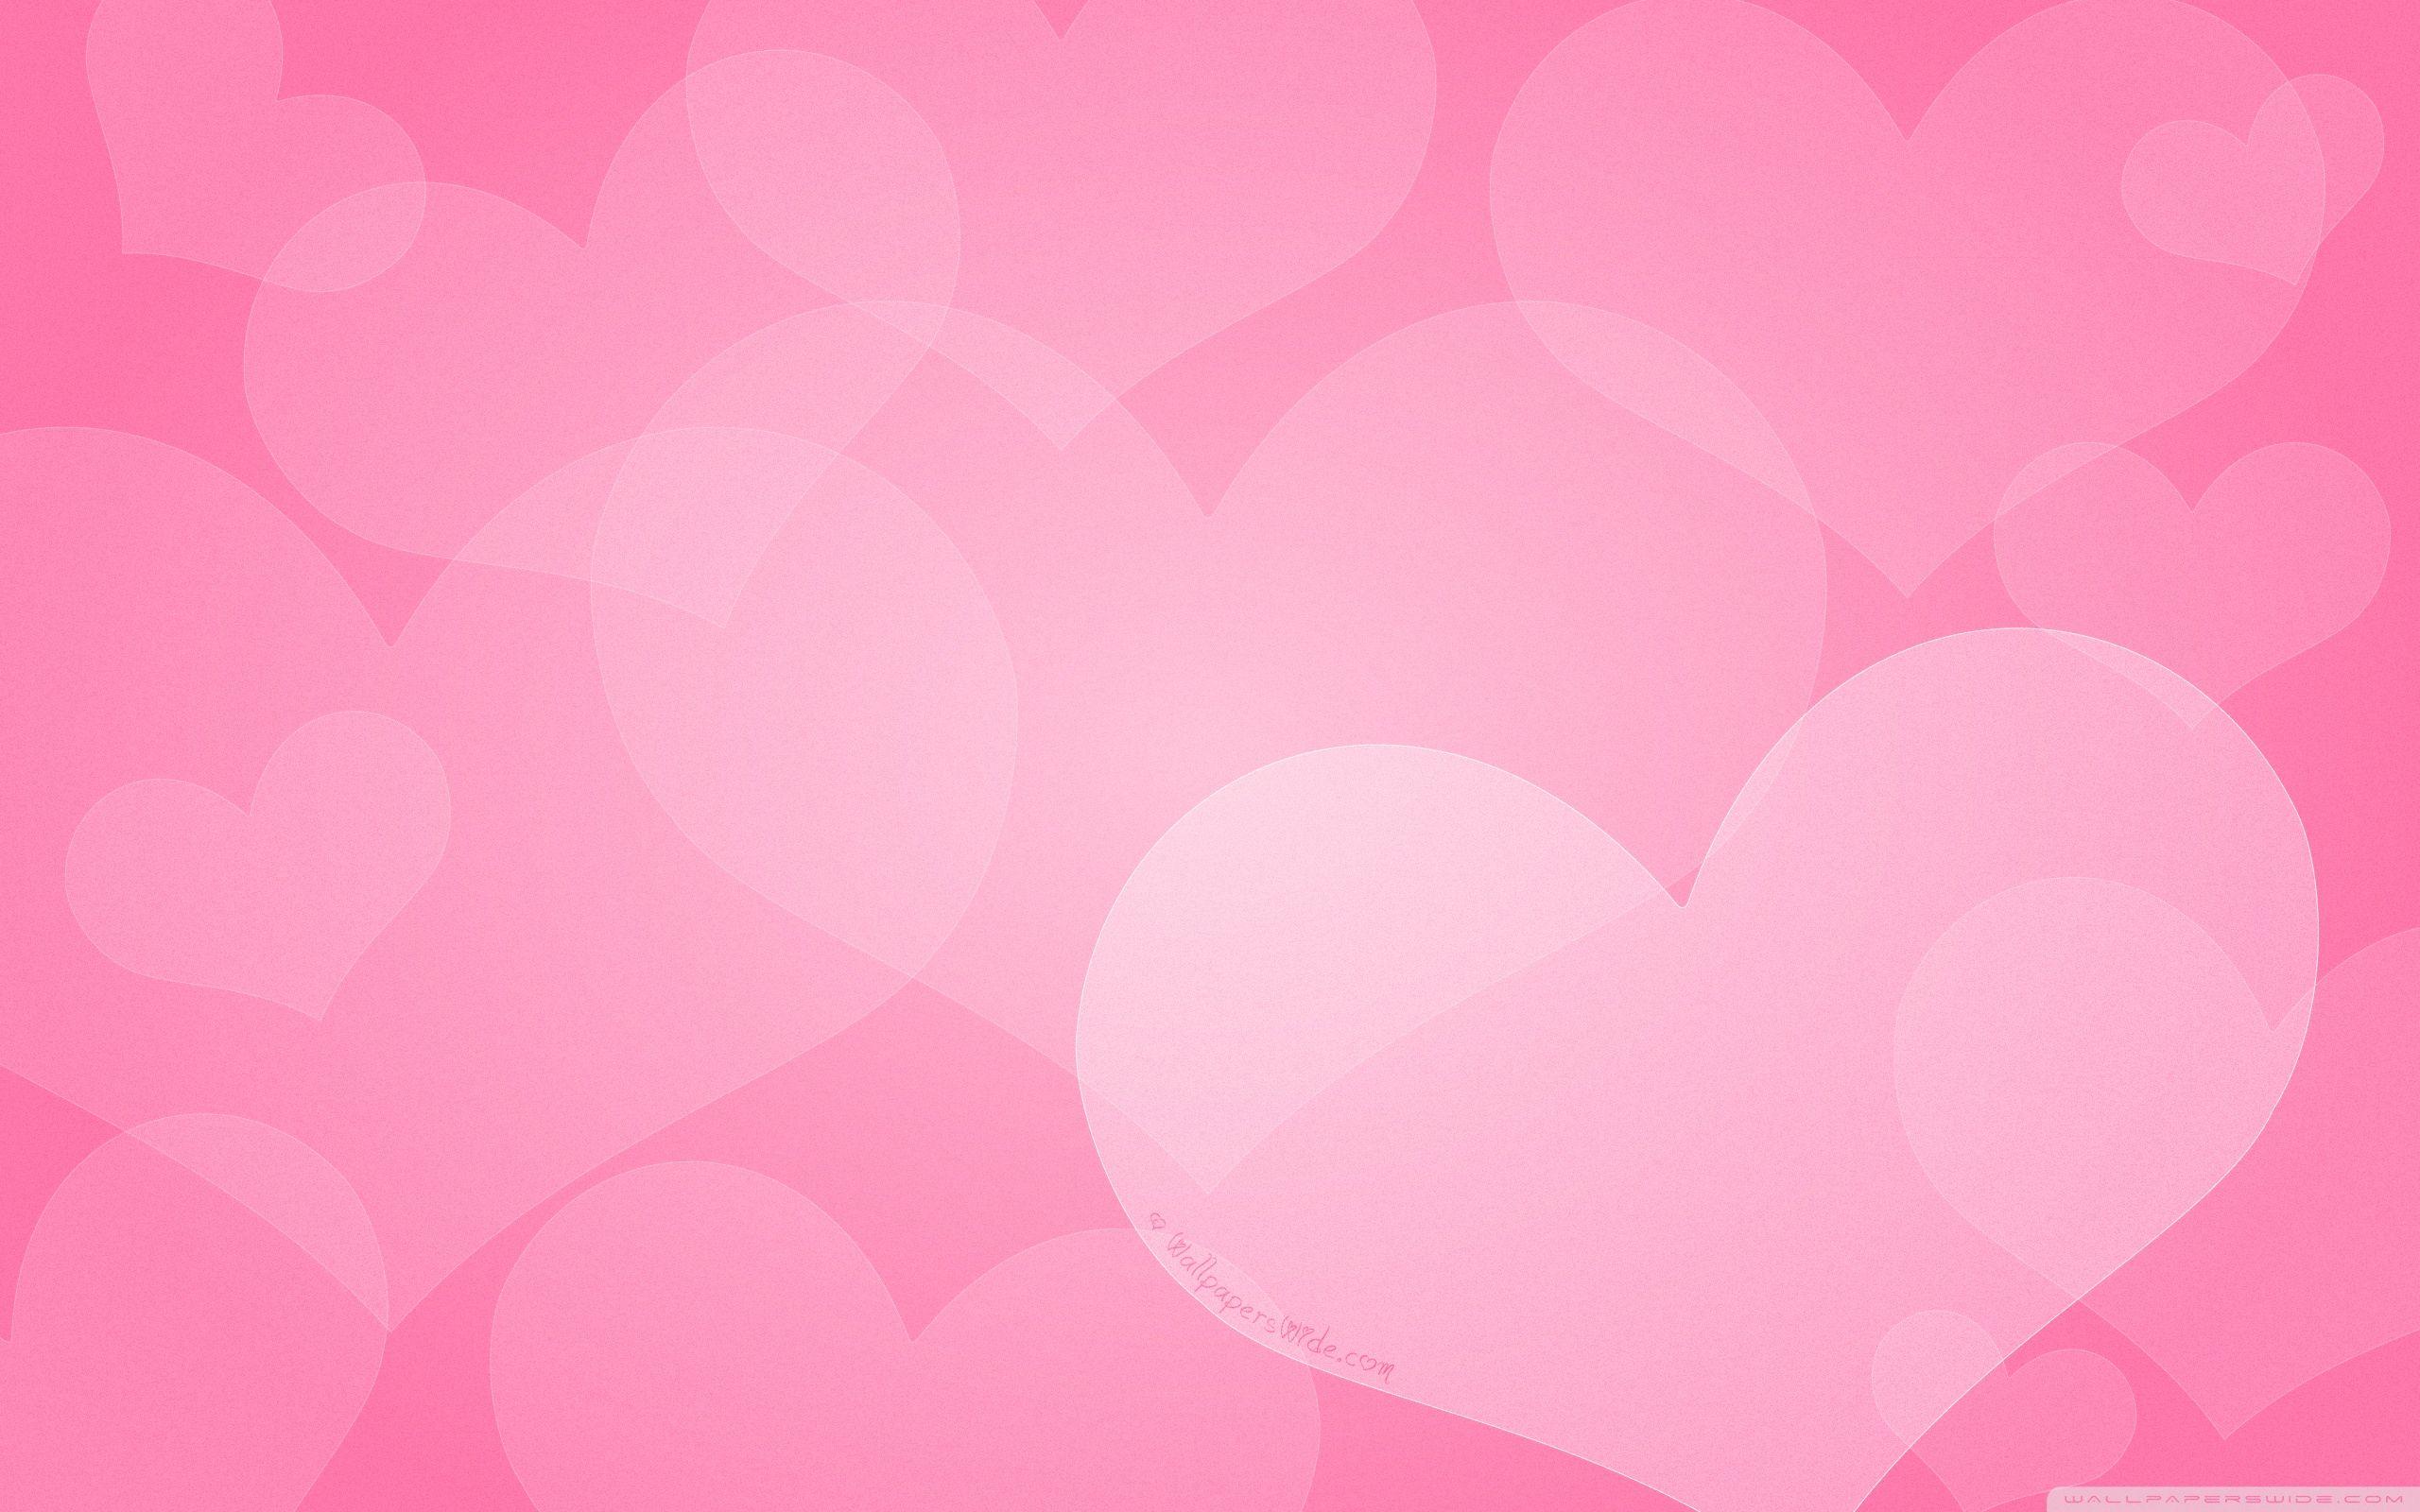 Pink Valentines Wallpapers - Wallpaper Cave